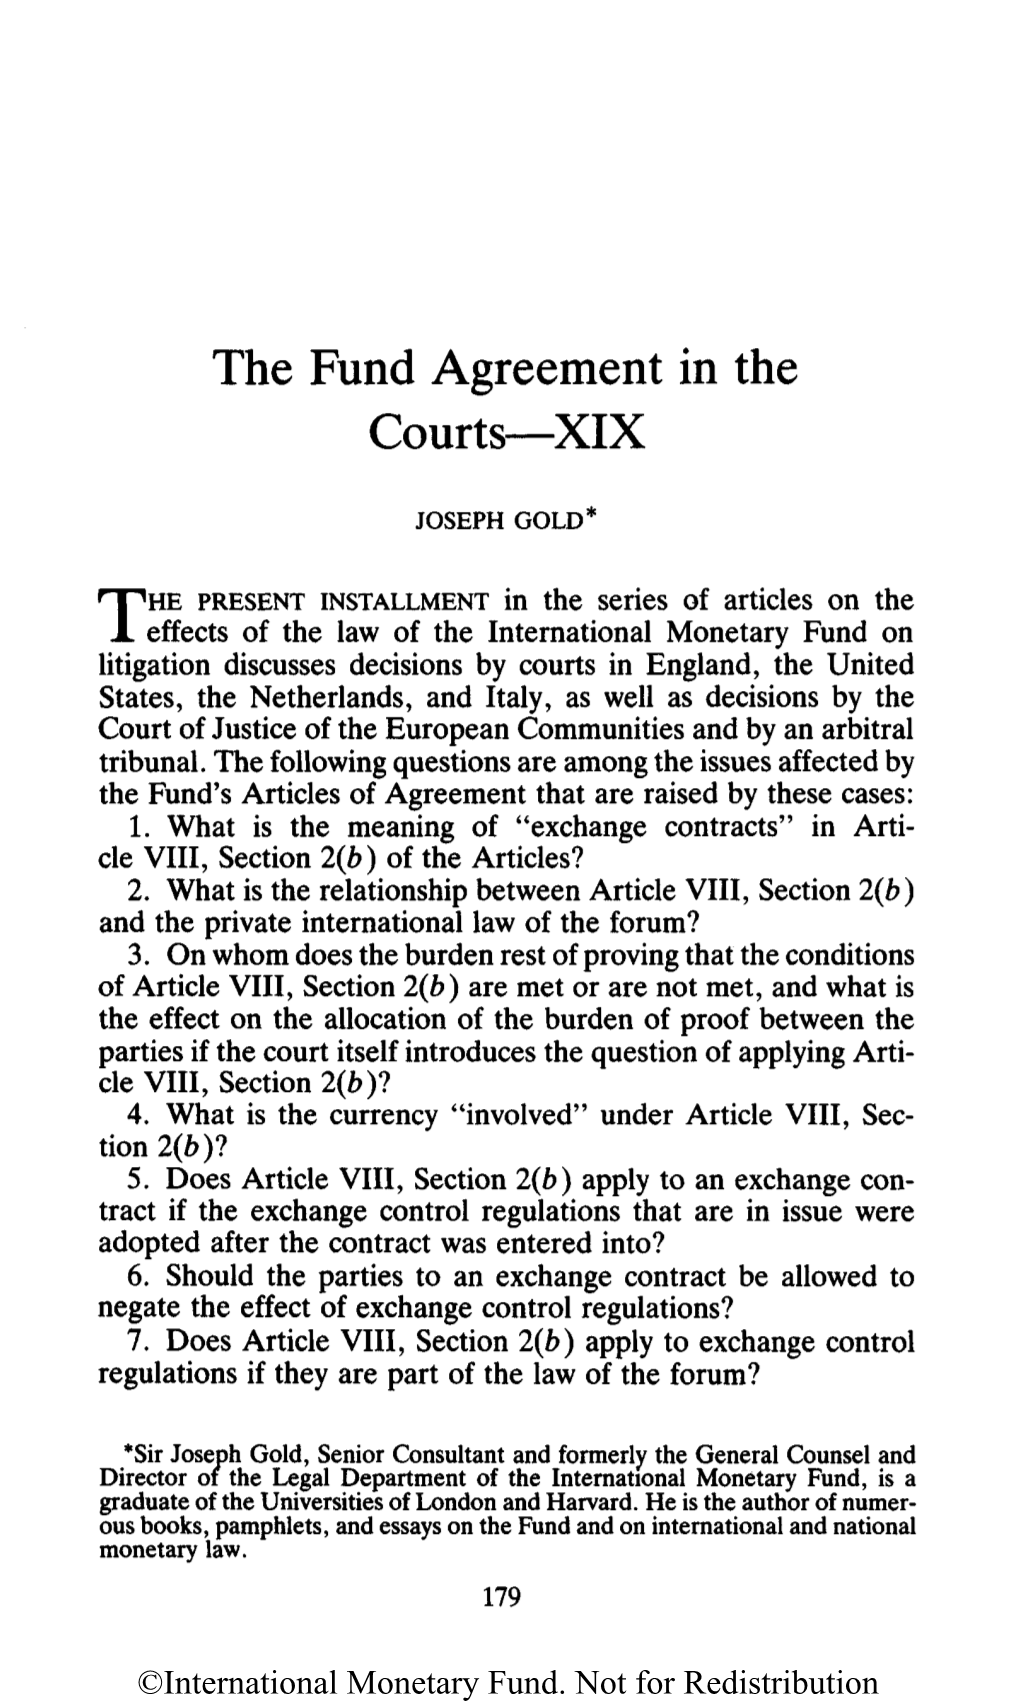 The Fund Agreement in the Courts—XIX